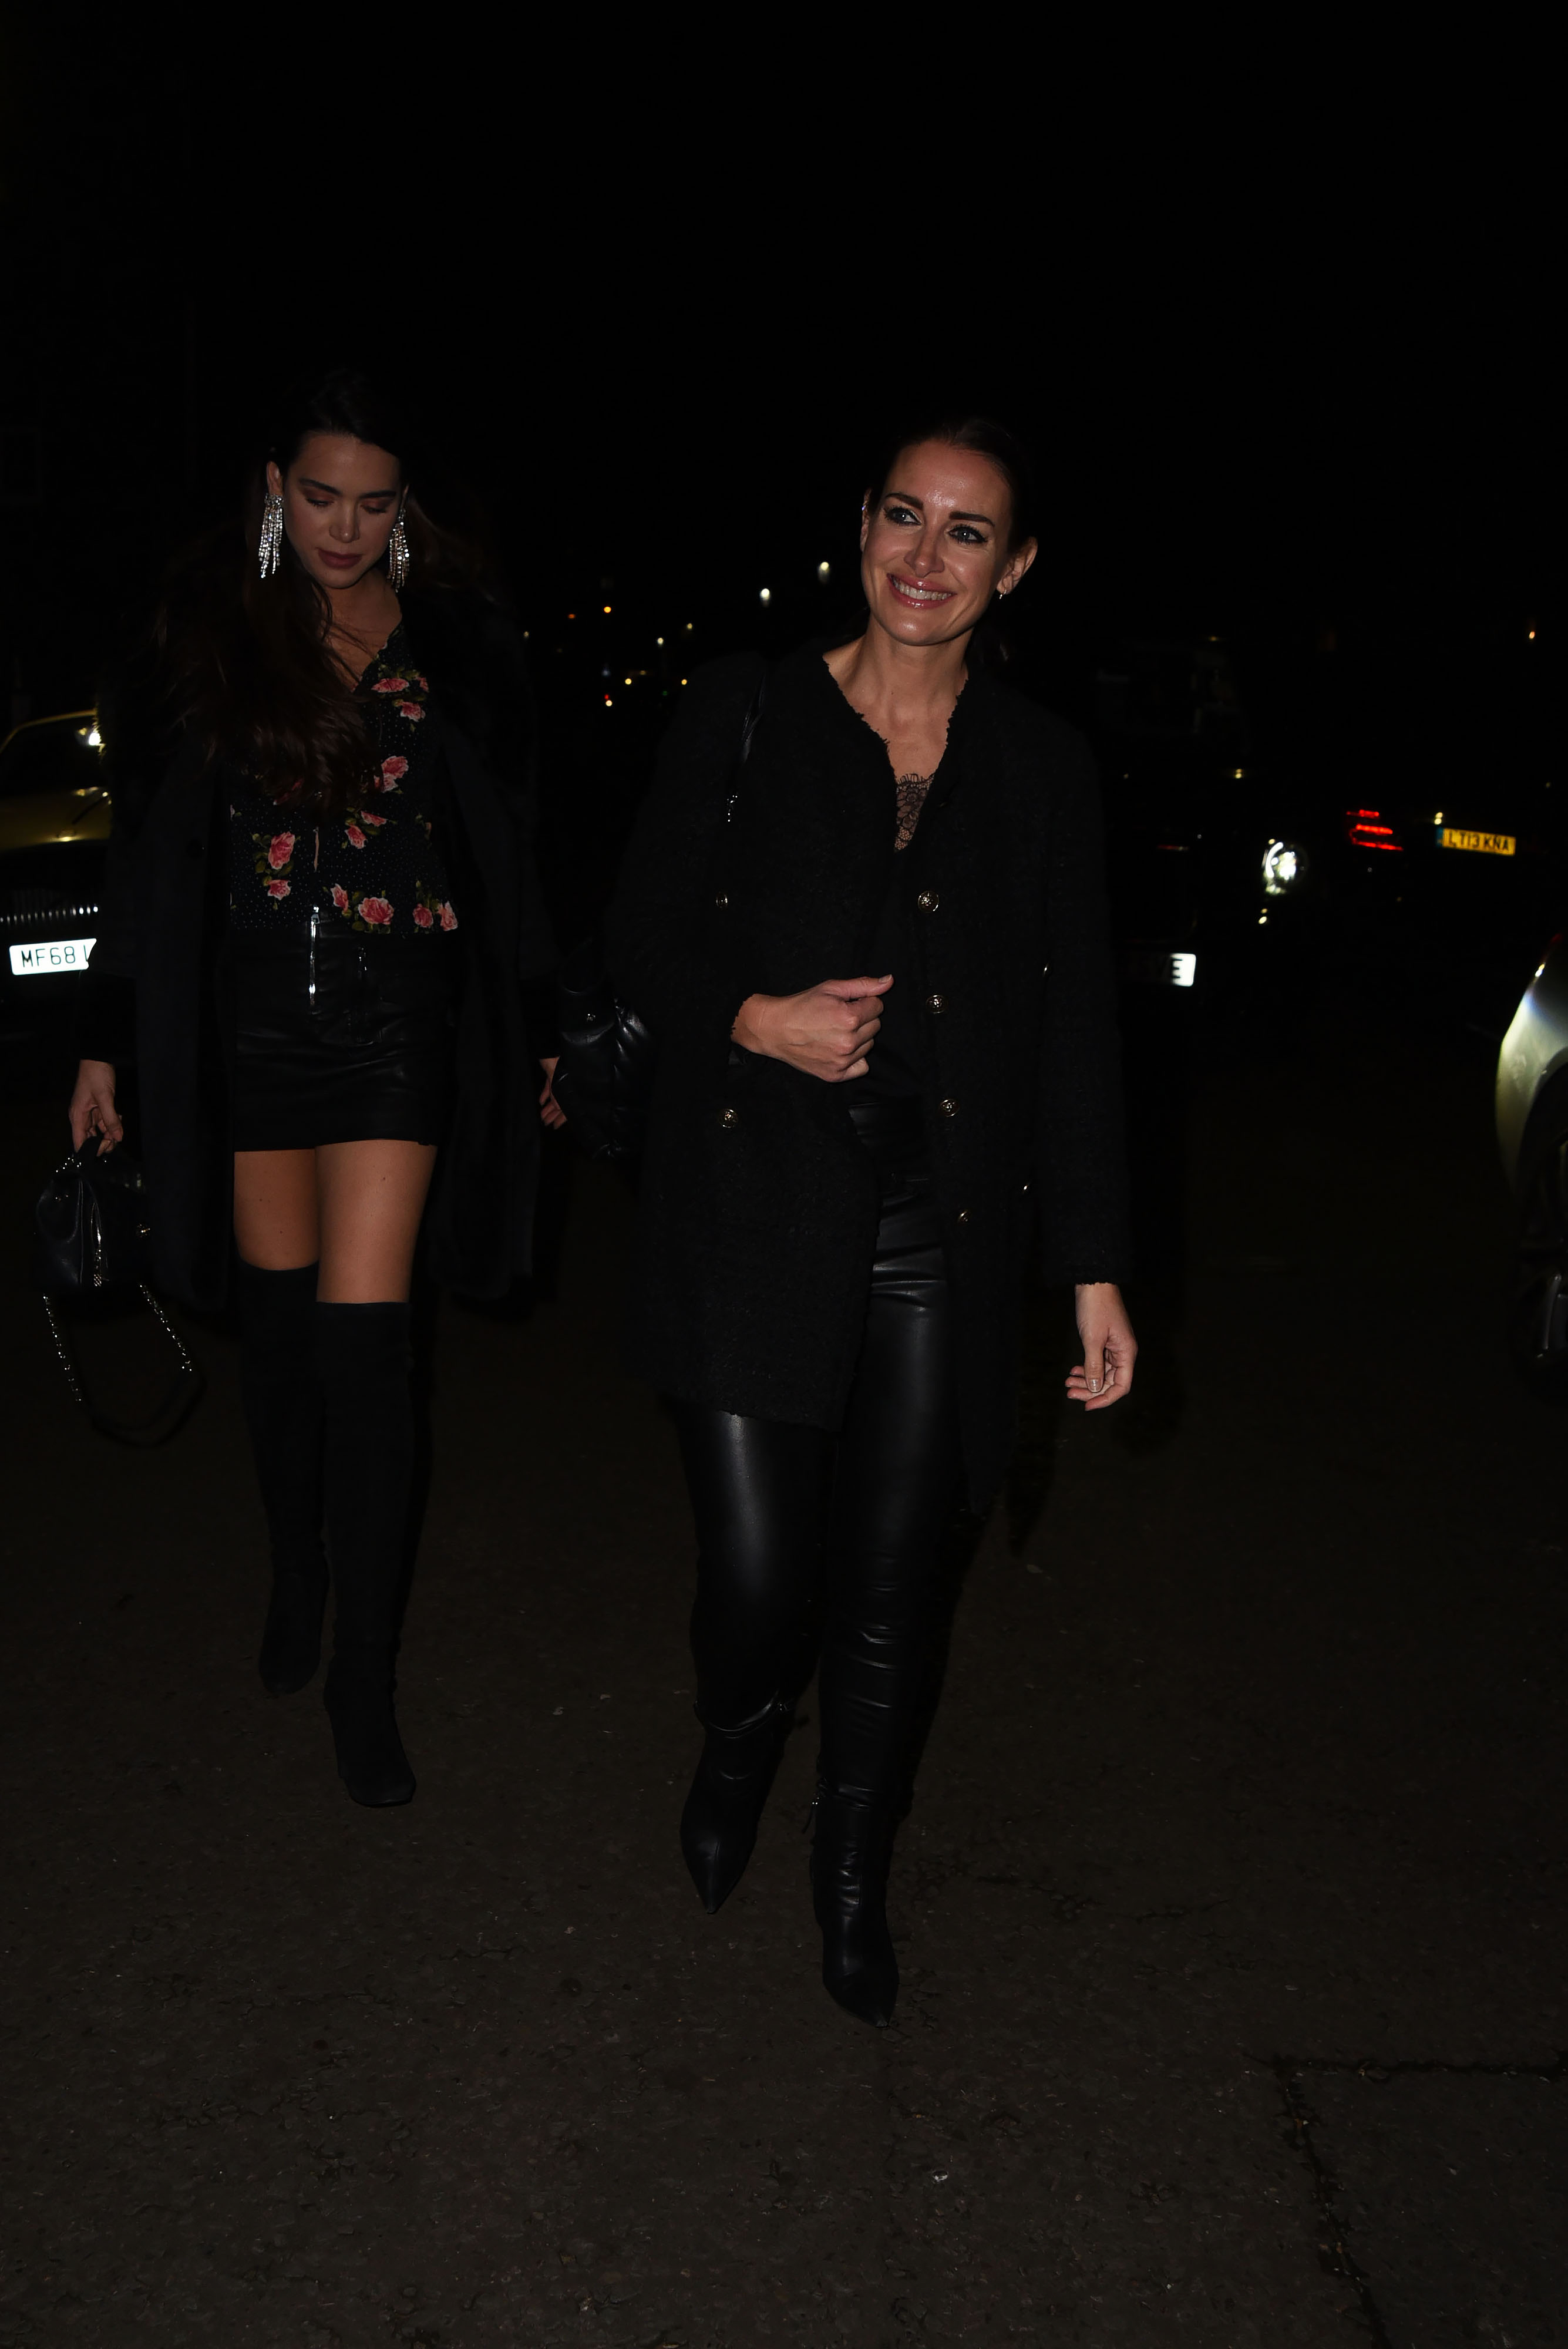 Kirsty Gallacher attends Piers Morgan’s Christmas Party